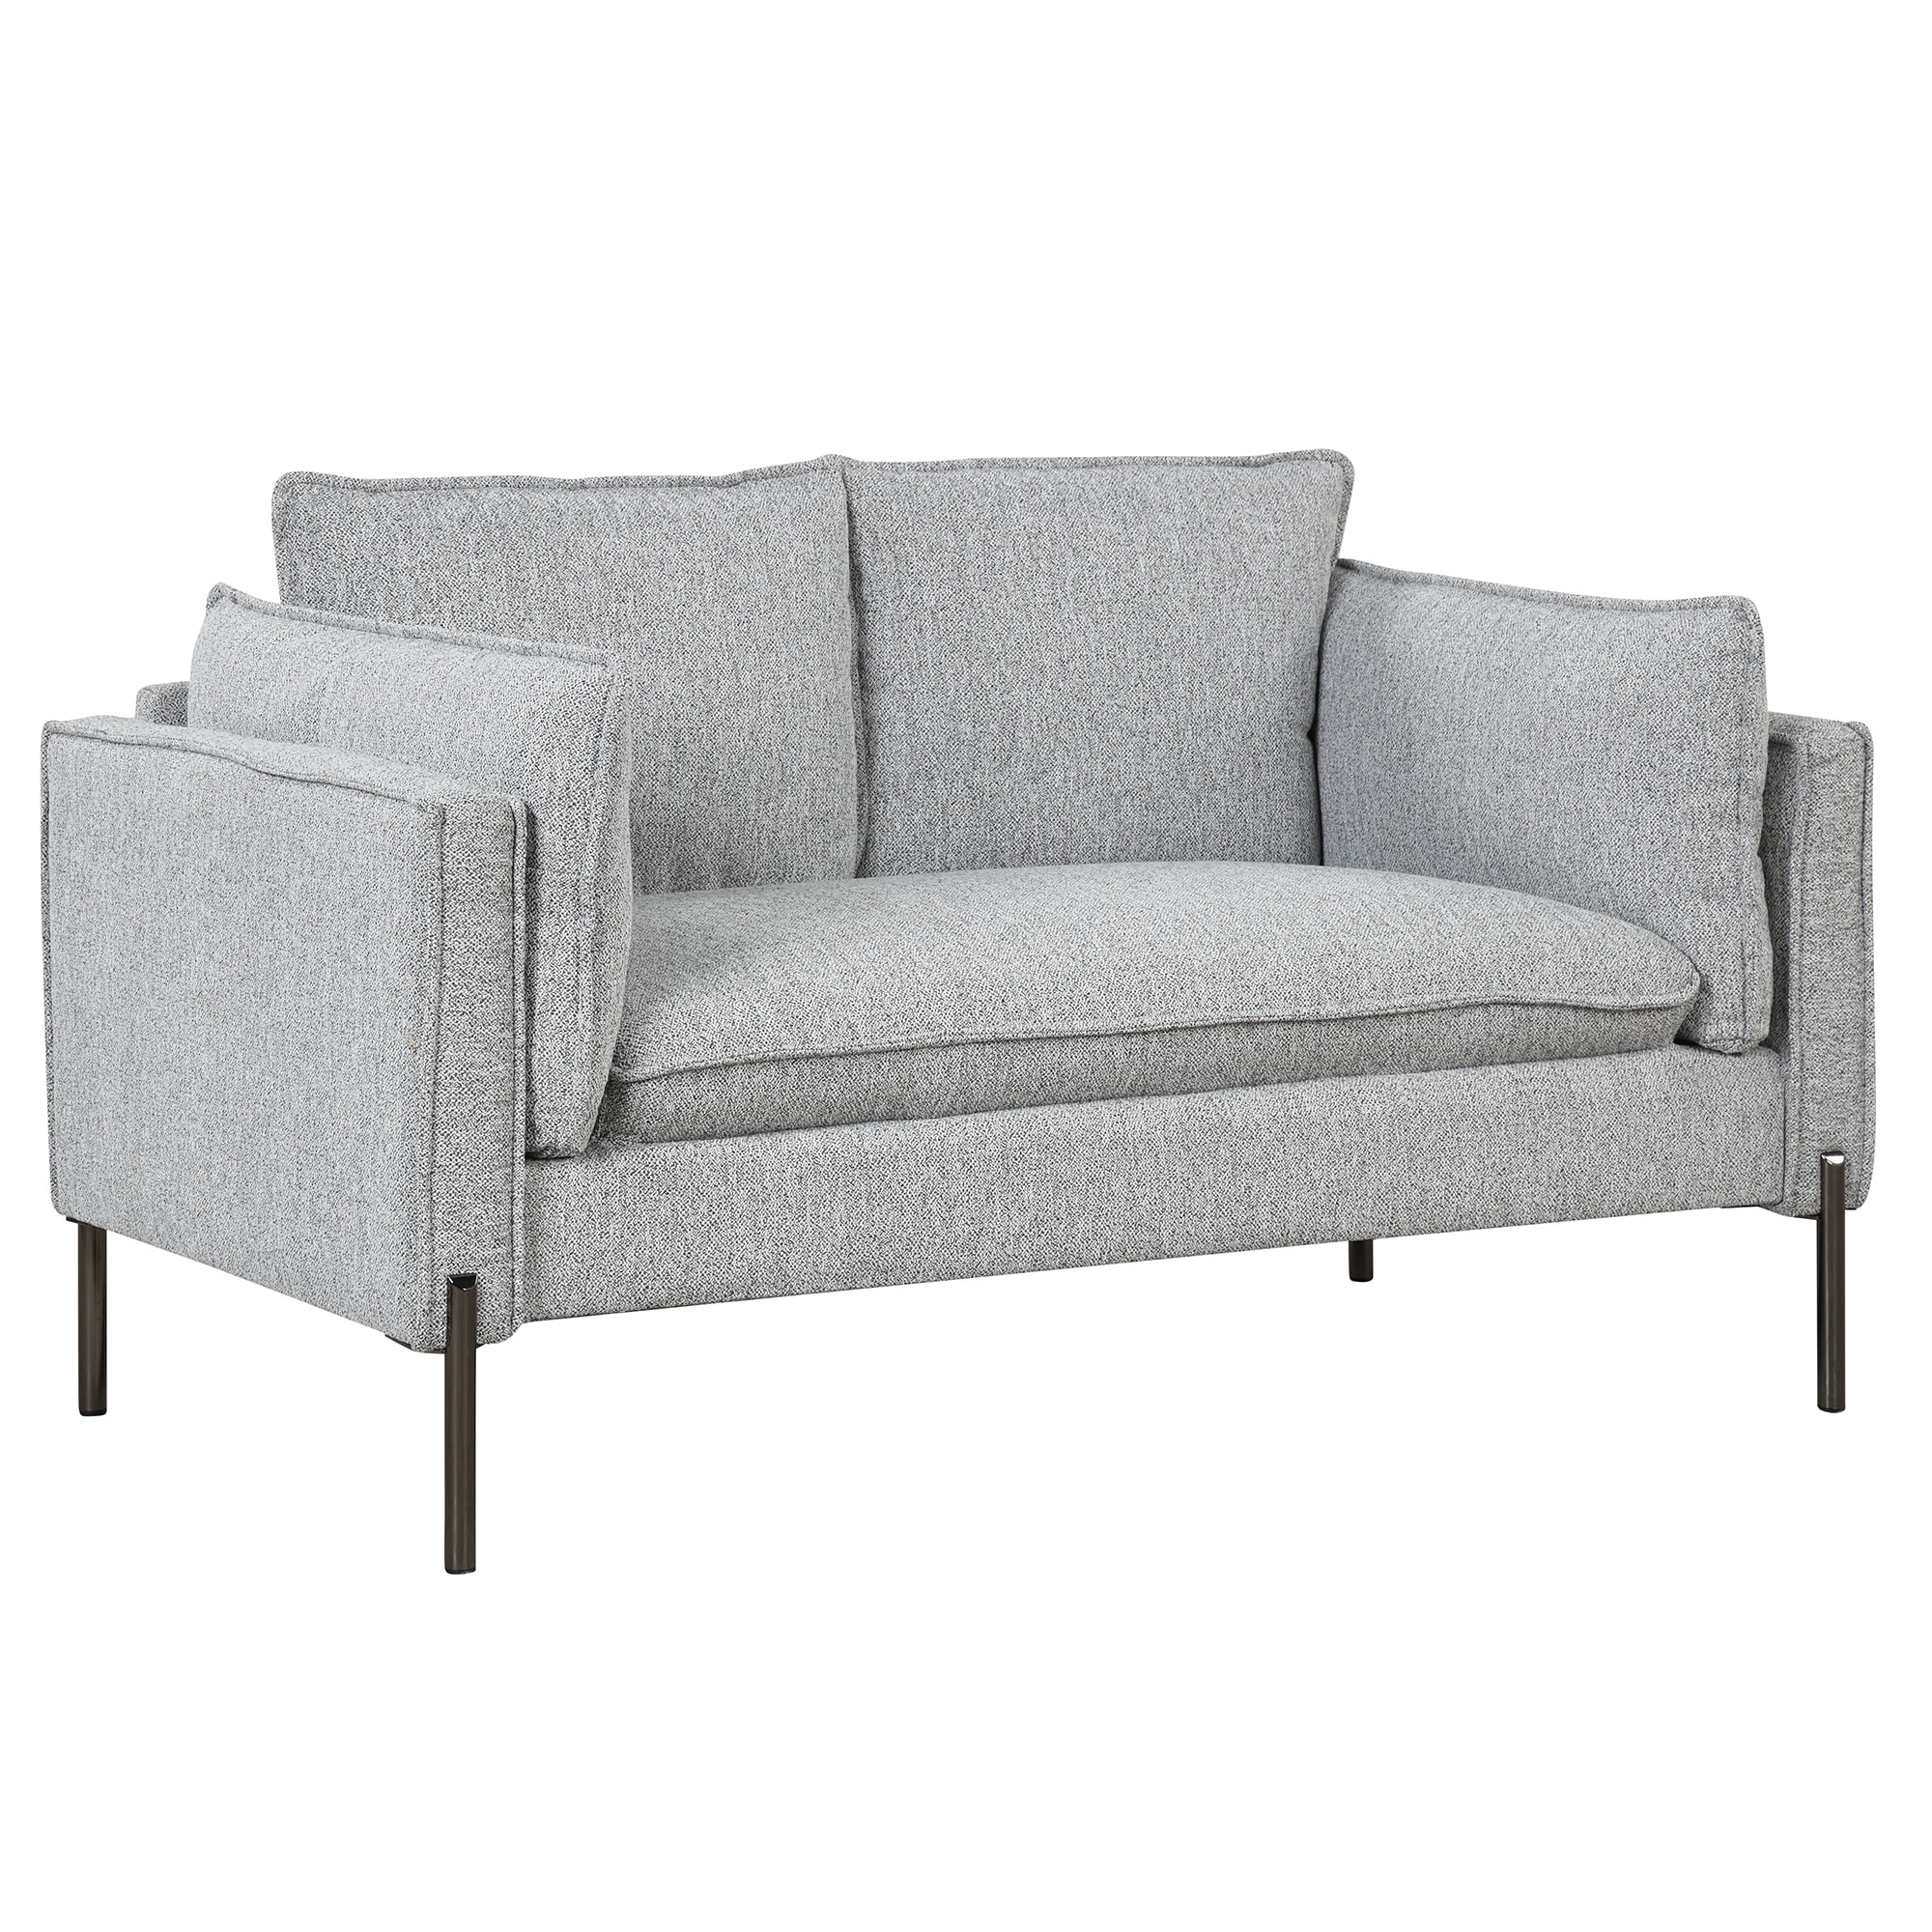 Modern Loveseat Sofa Linen Fabric Upholstered Couch Furniture Metal Legs Loveseat Couch With Usb Charging Ports and Two Pillows